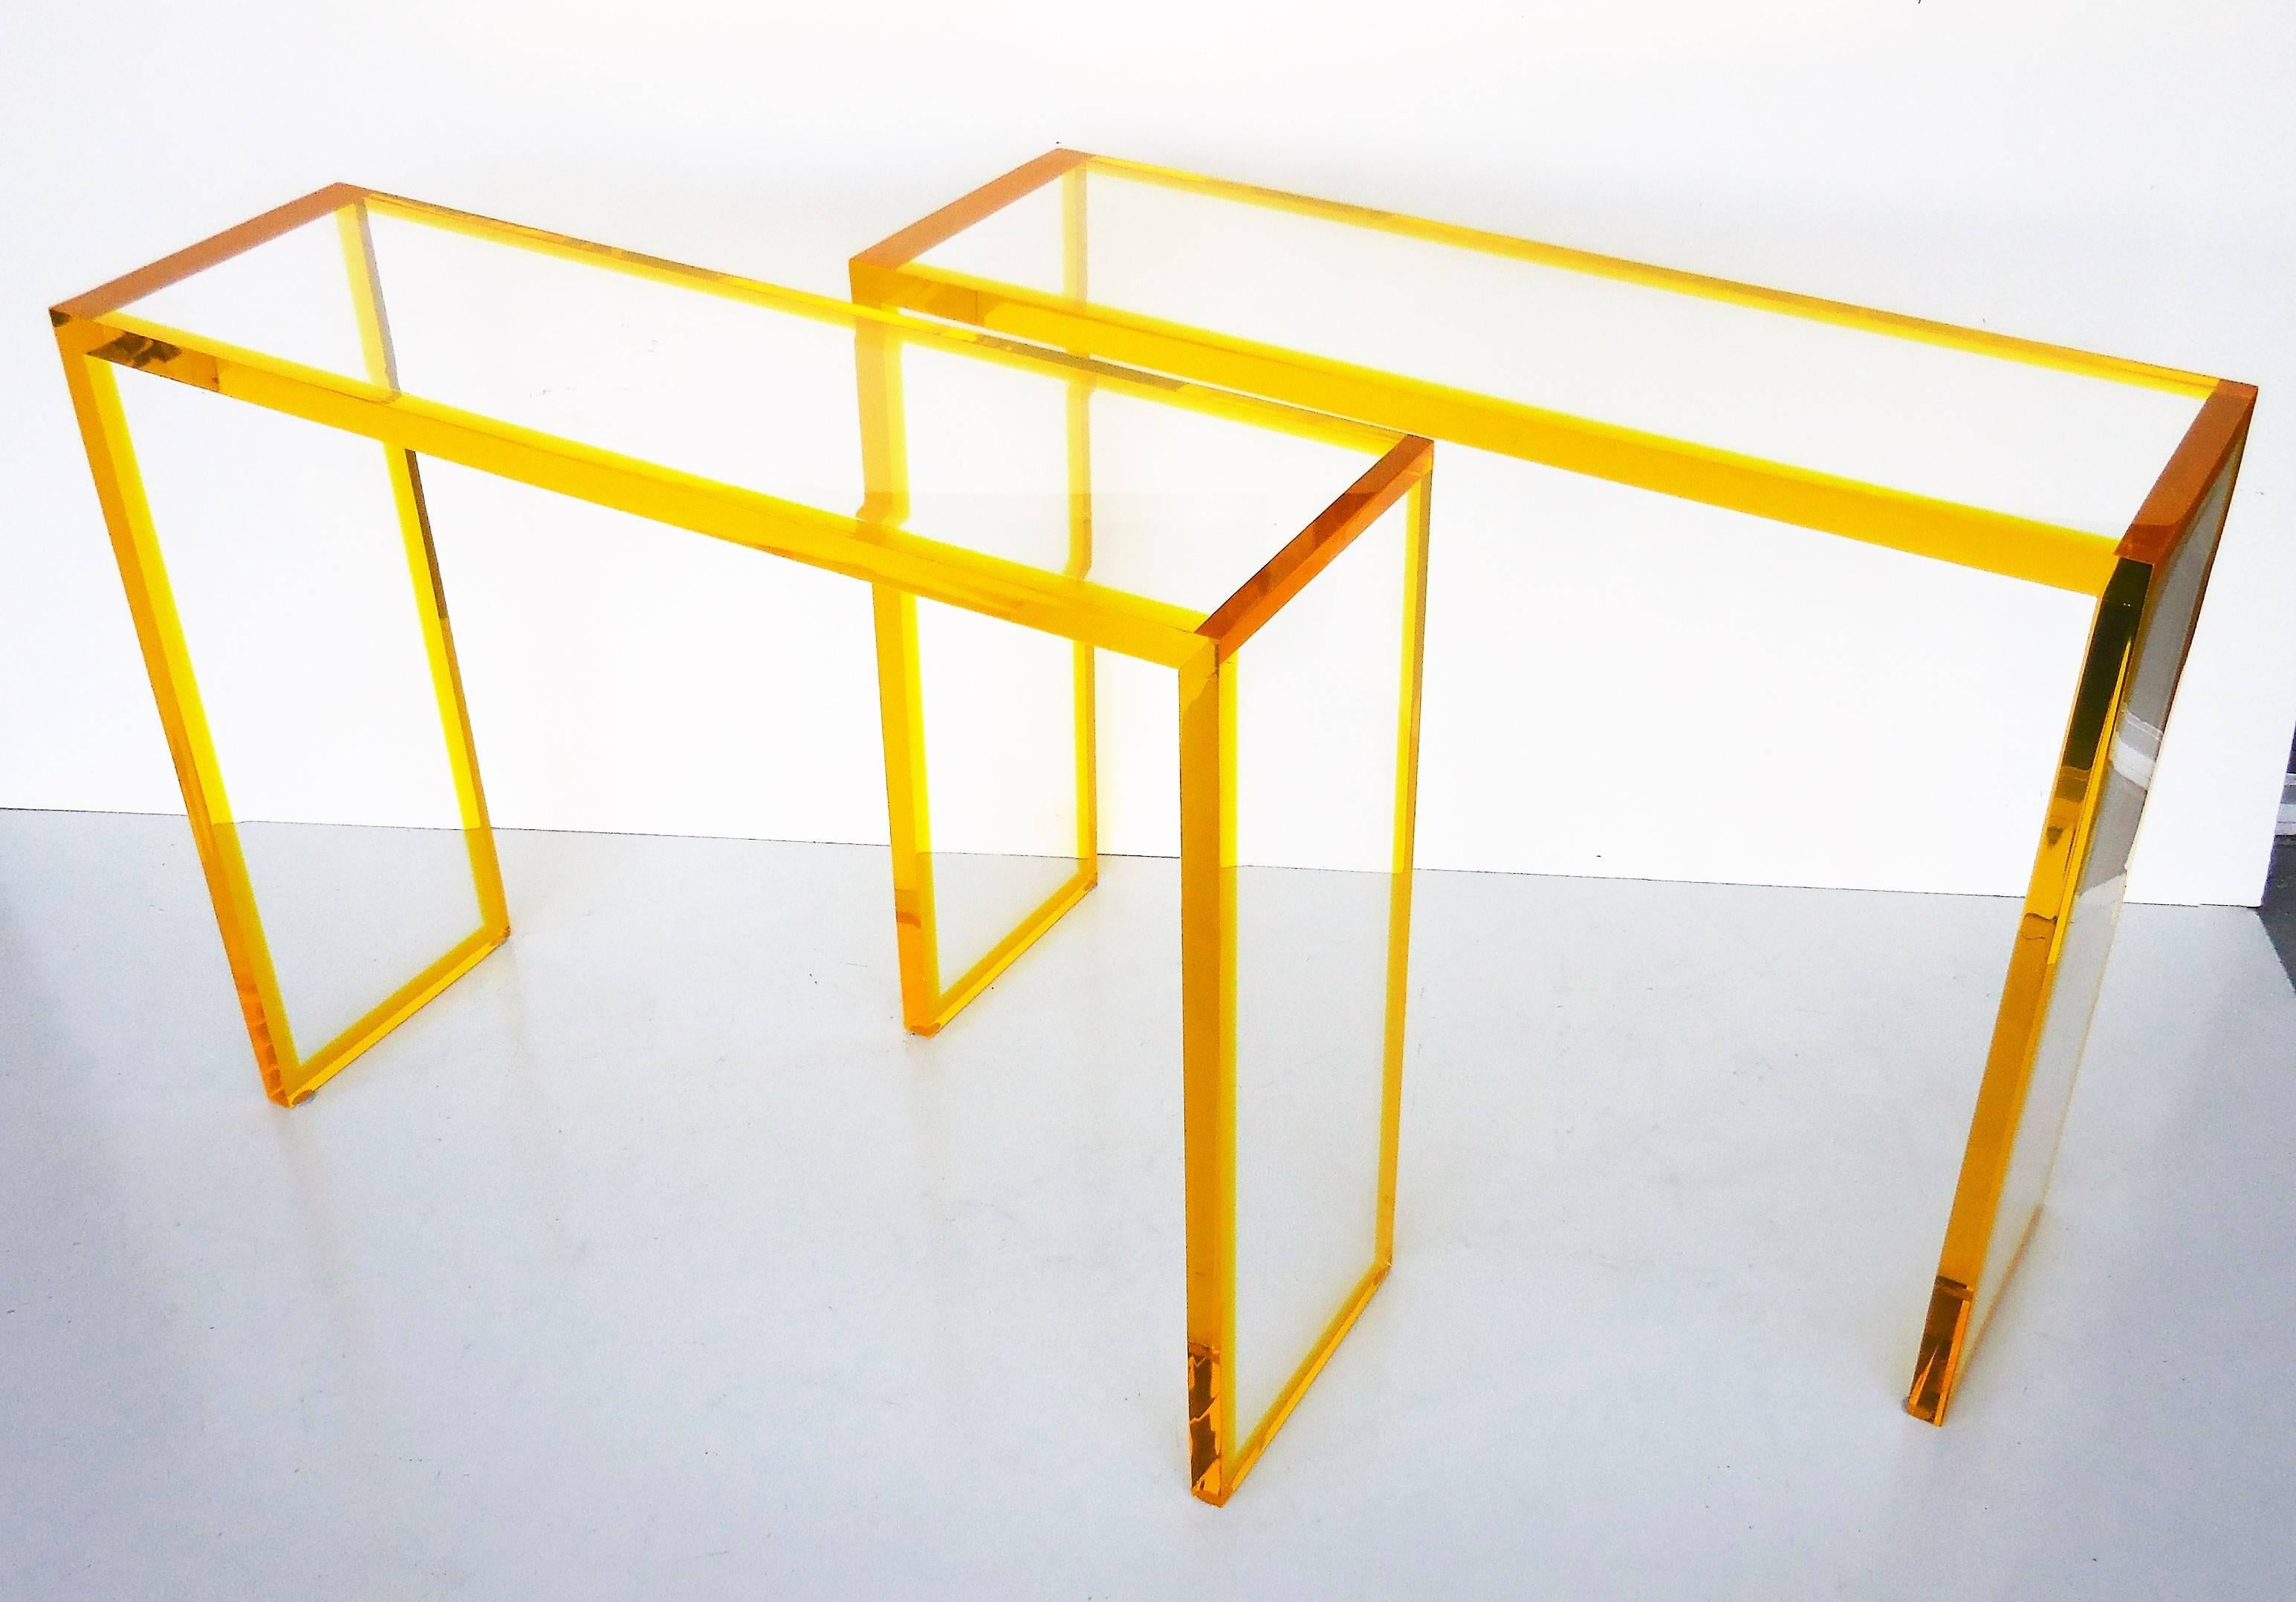 Unique pair of consoles, thick acrylic construction. All the edges are bright yellow acrylic. Available individually or as a pair.